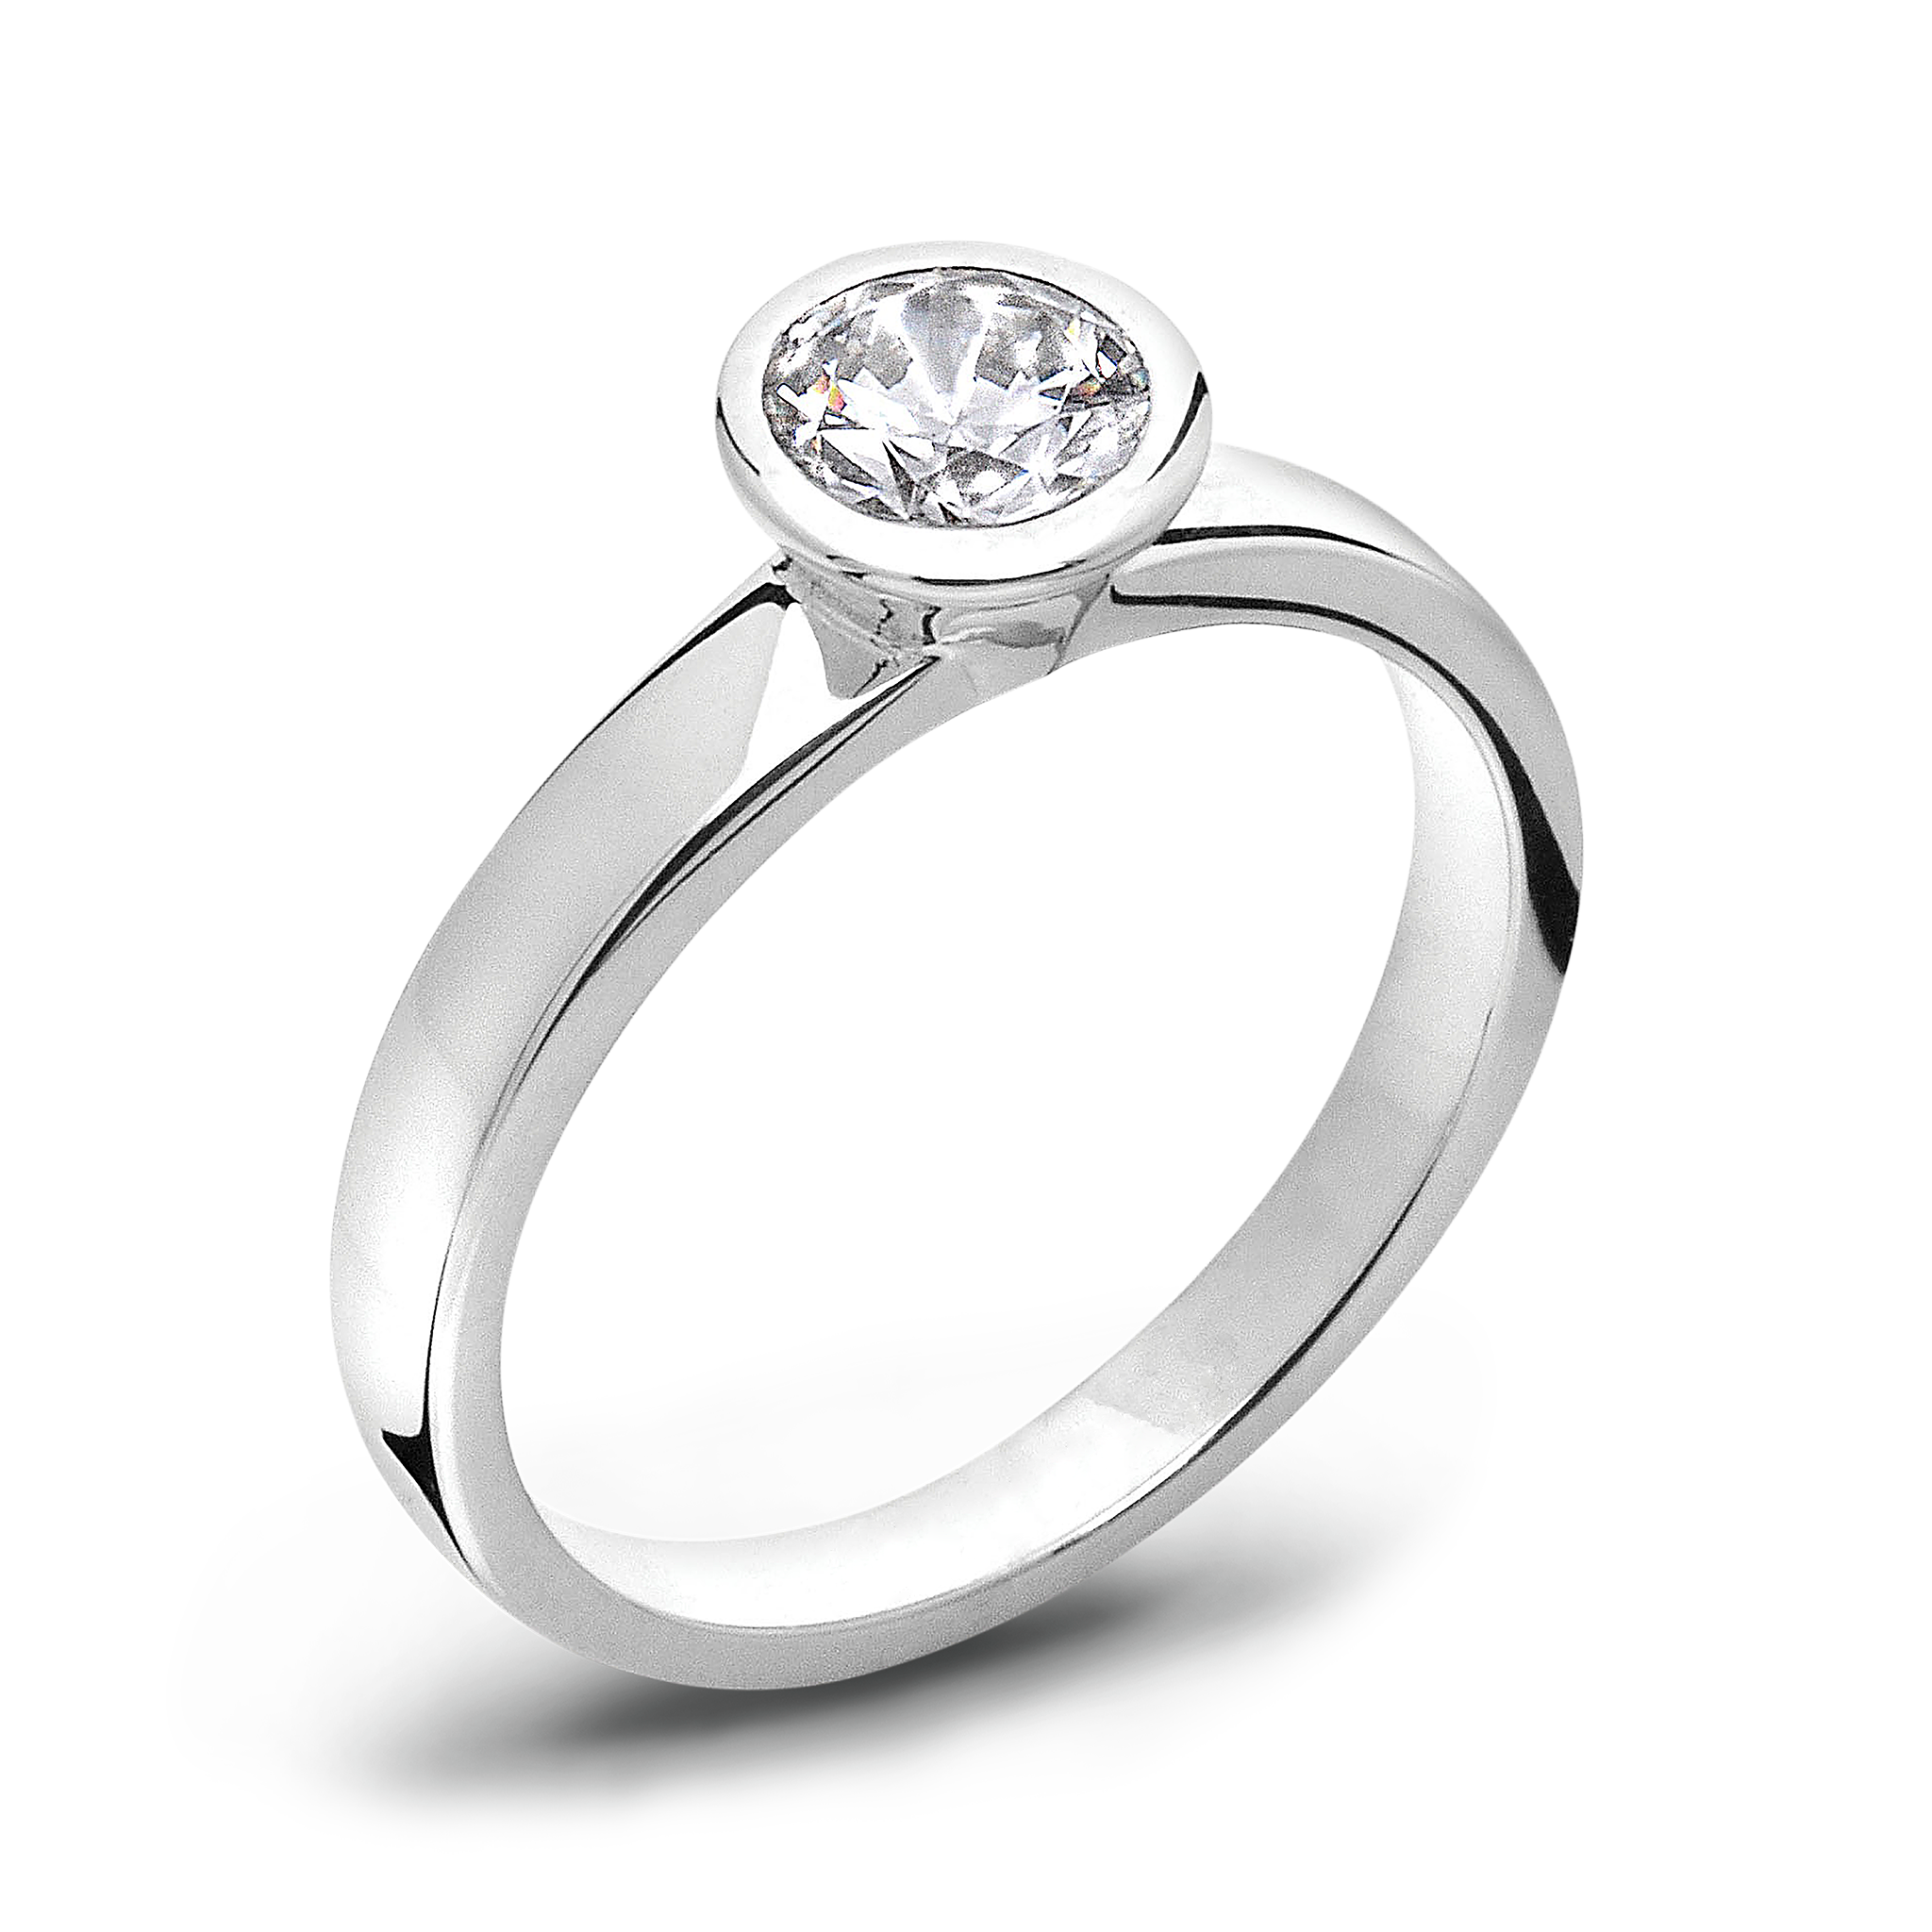 Brilliant Cut Canadian Diamond Fairtrade Gold Engagement Ring in